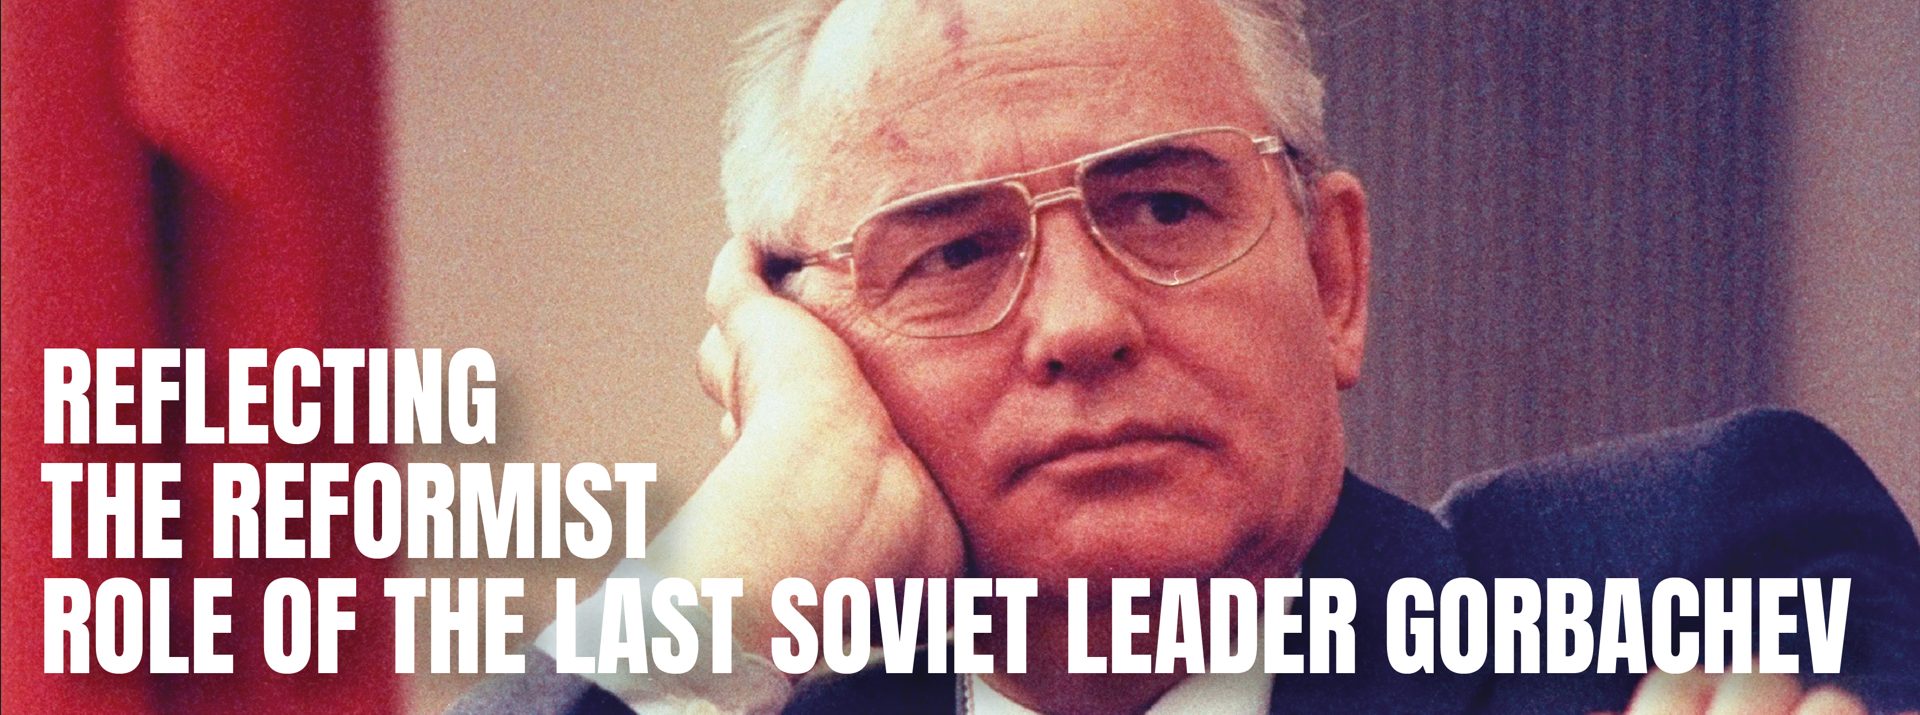 You are currently viewing Reflecting the Reformistrole of the last soviet leader Gorbachev